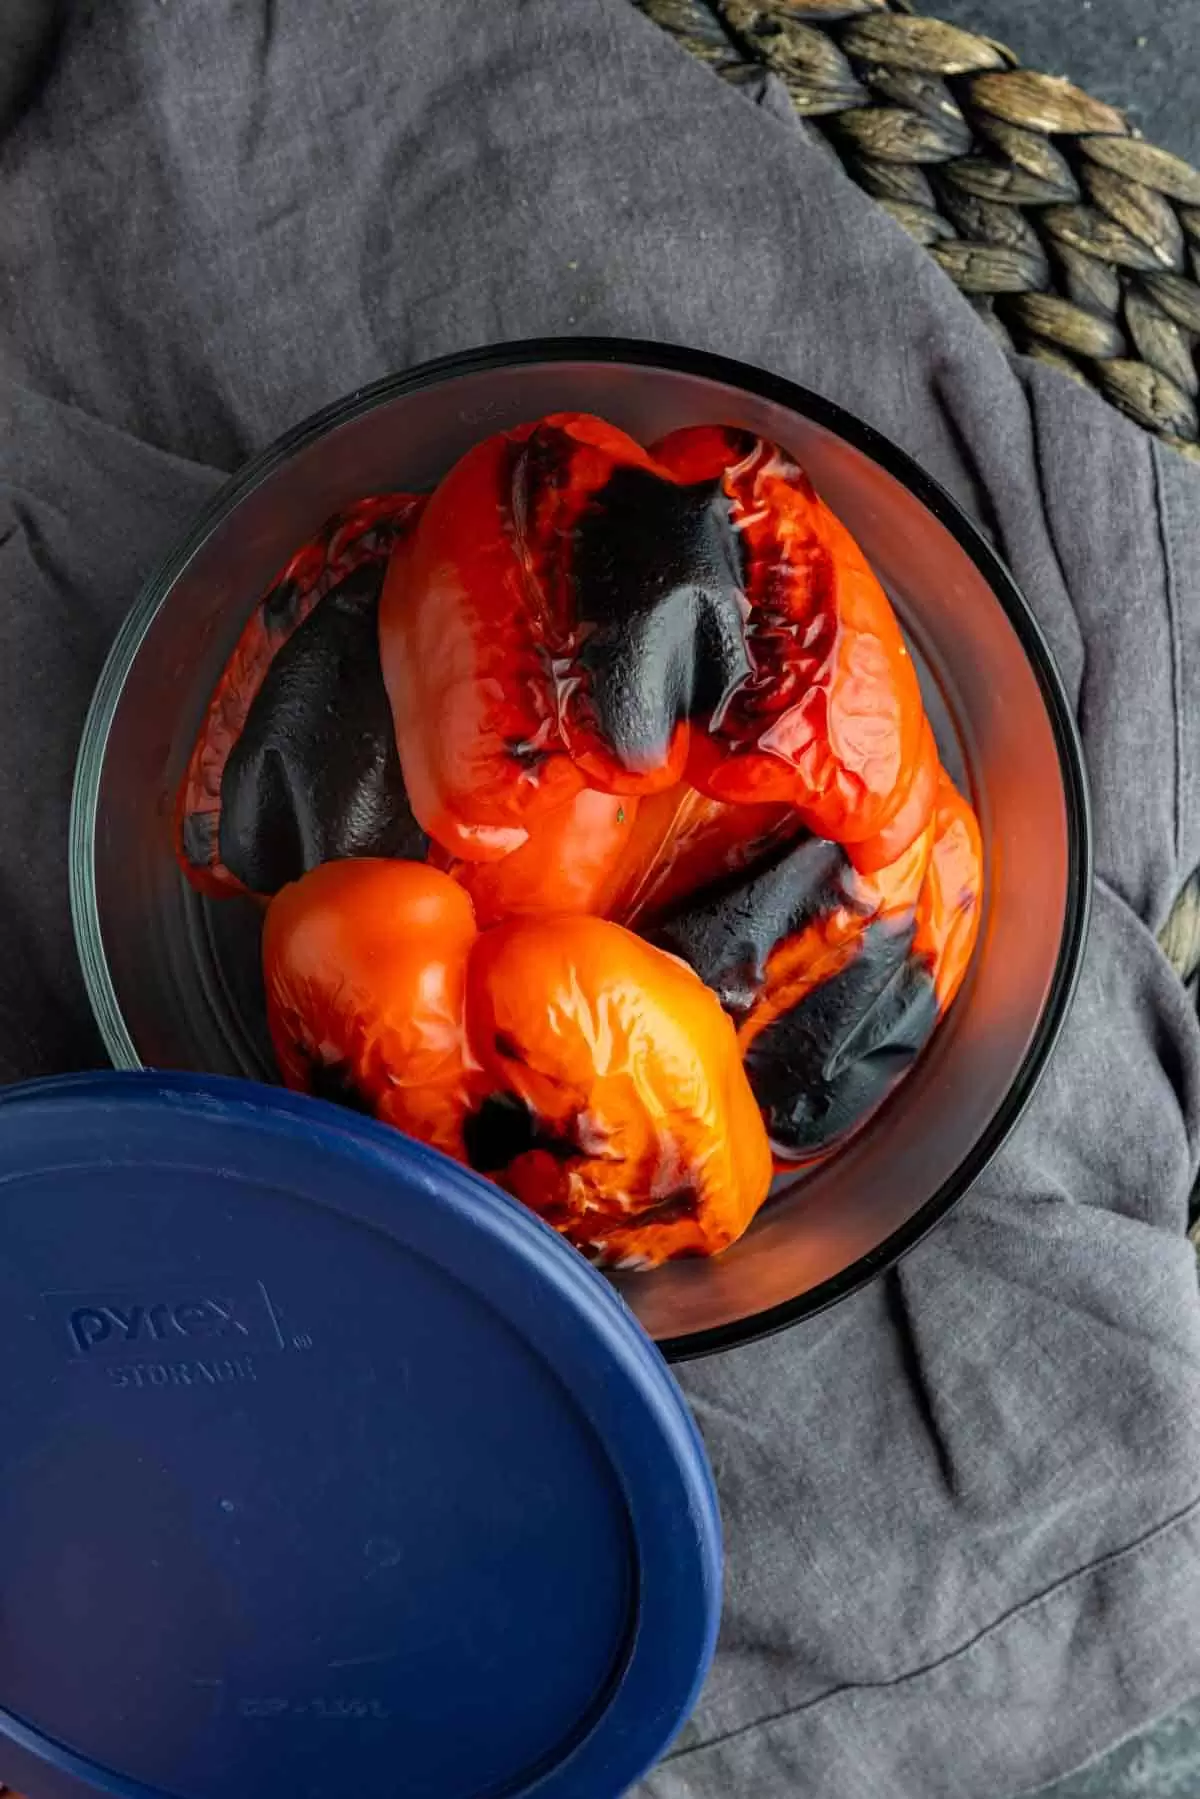 Roasting a Red Pepper and removing the skin